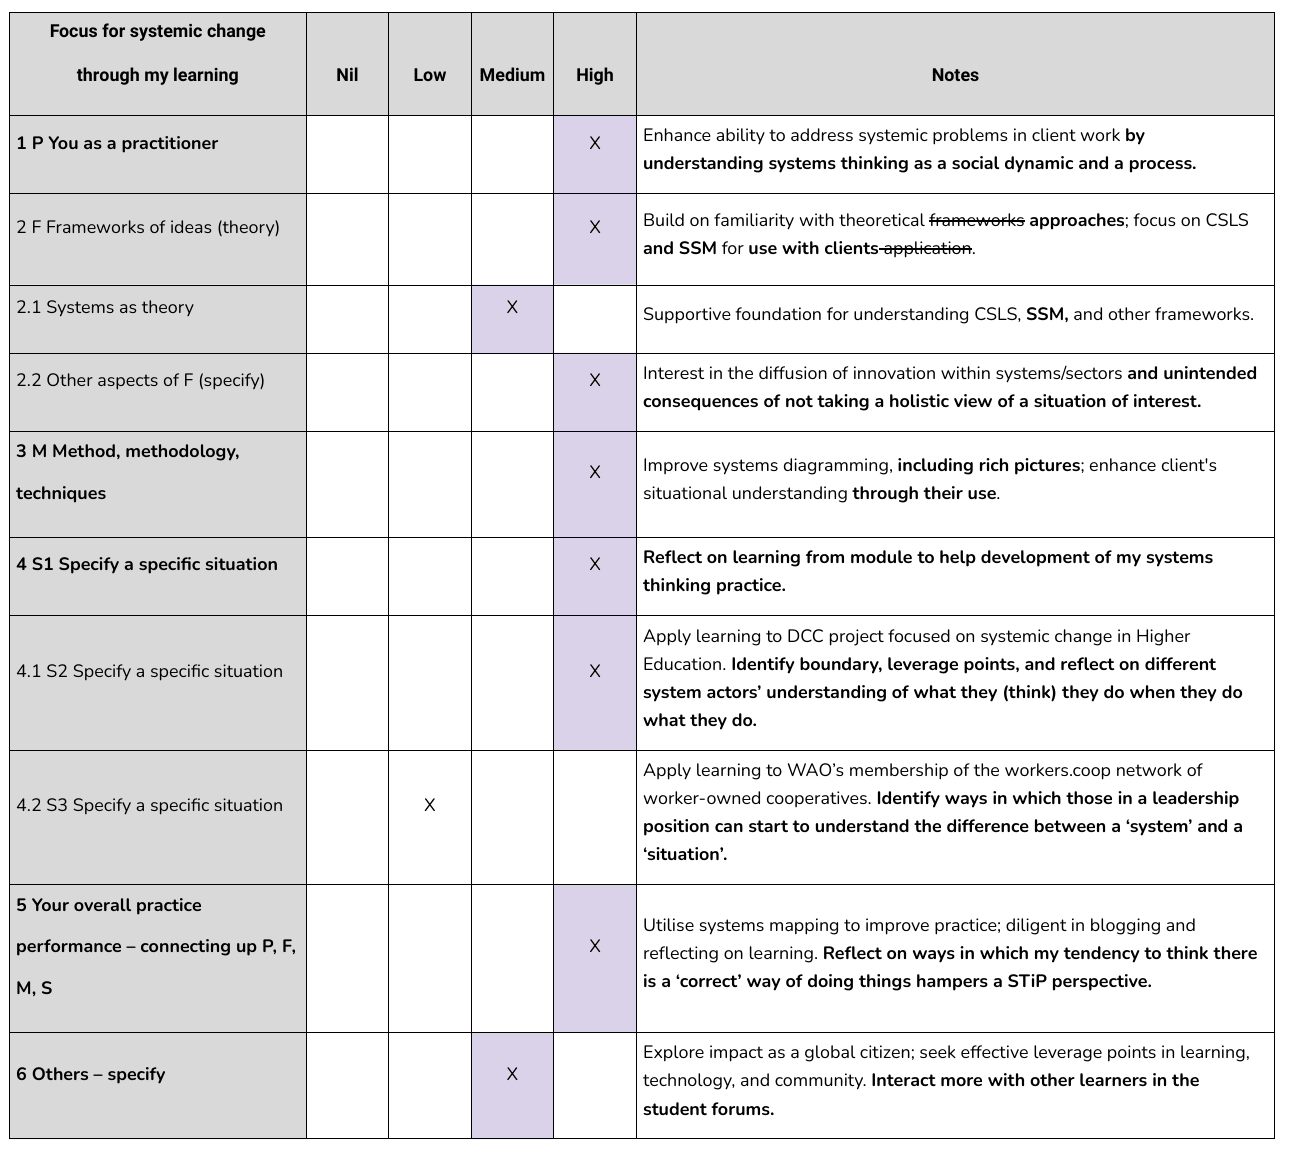 Version 2 of my learning contract